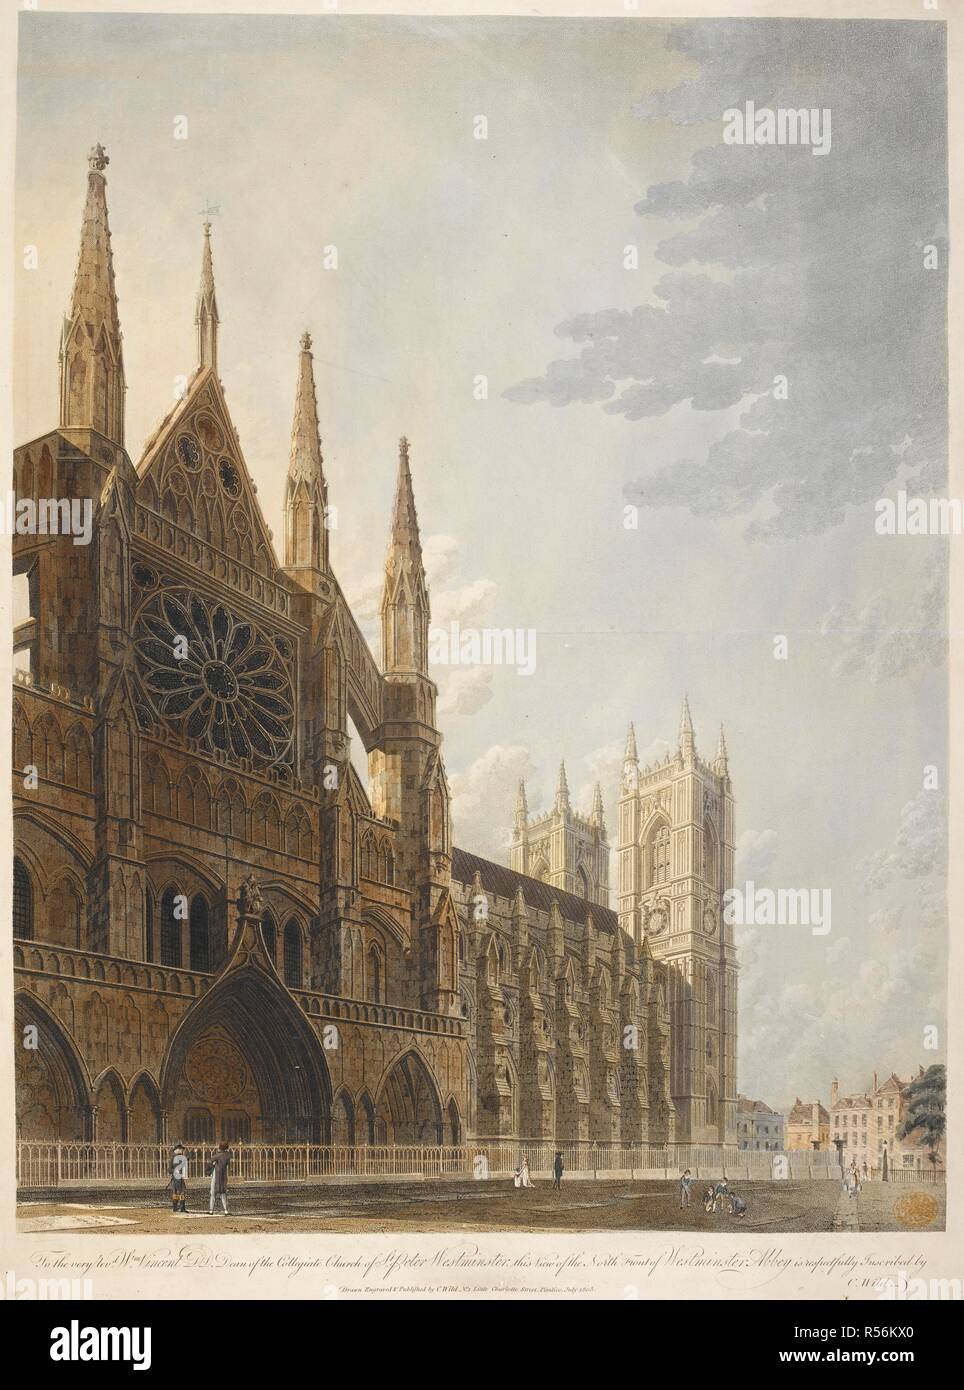 A view of the north entrance of Westminster Abbey; the west towers in the middle distance to the left; figures in front of the entrance including a group of boys playing a game, two gentlemen studying the Abbey and a maid carrying two buckets. To the very Revd. Vincent DL, Dean of the Collegiate Church of St Peter Westminster, : this View of the North Front of Westminster Abbey is respectfully inscribed by C. Wild. [London] : Drawn, Engraved & Published by C. Wild, No1 Little Charlotte Street, Pimlico, July 1805. Aquatint and etching with hand-colouring. Source: Maps K.Top.24.4.o. Language: En Stock Photo